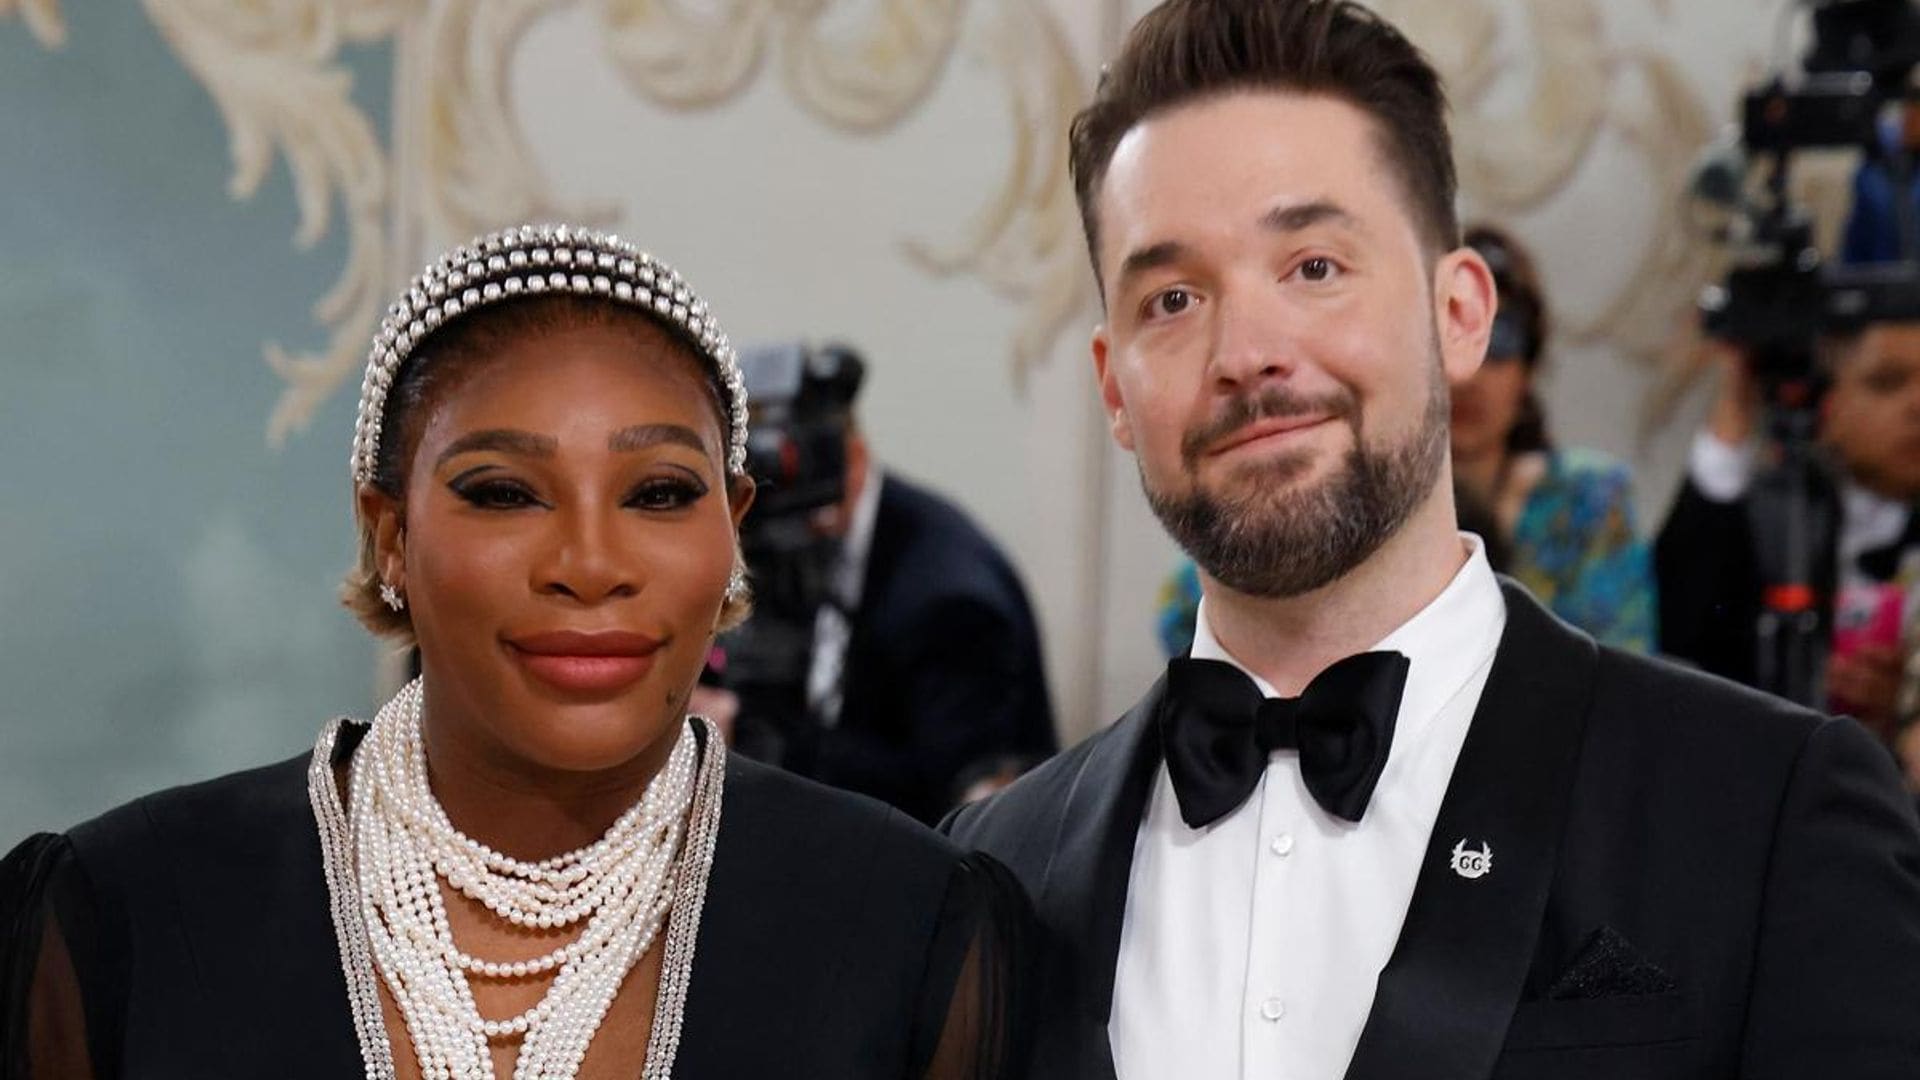 Serena Williams shares video with her newborn; Alexis Ohanian calls her the ‘GMOAT’